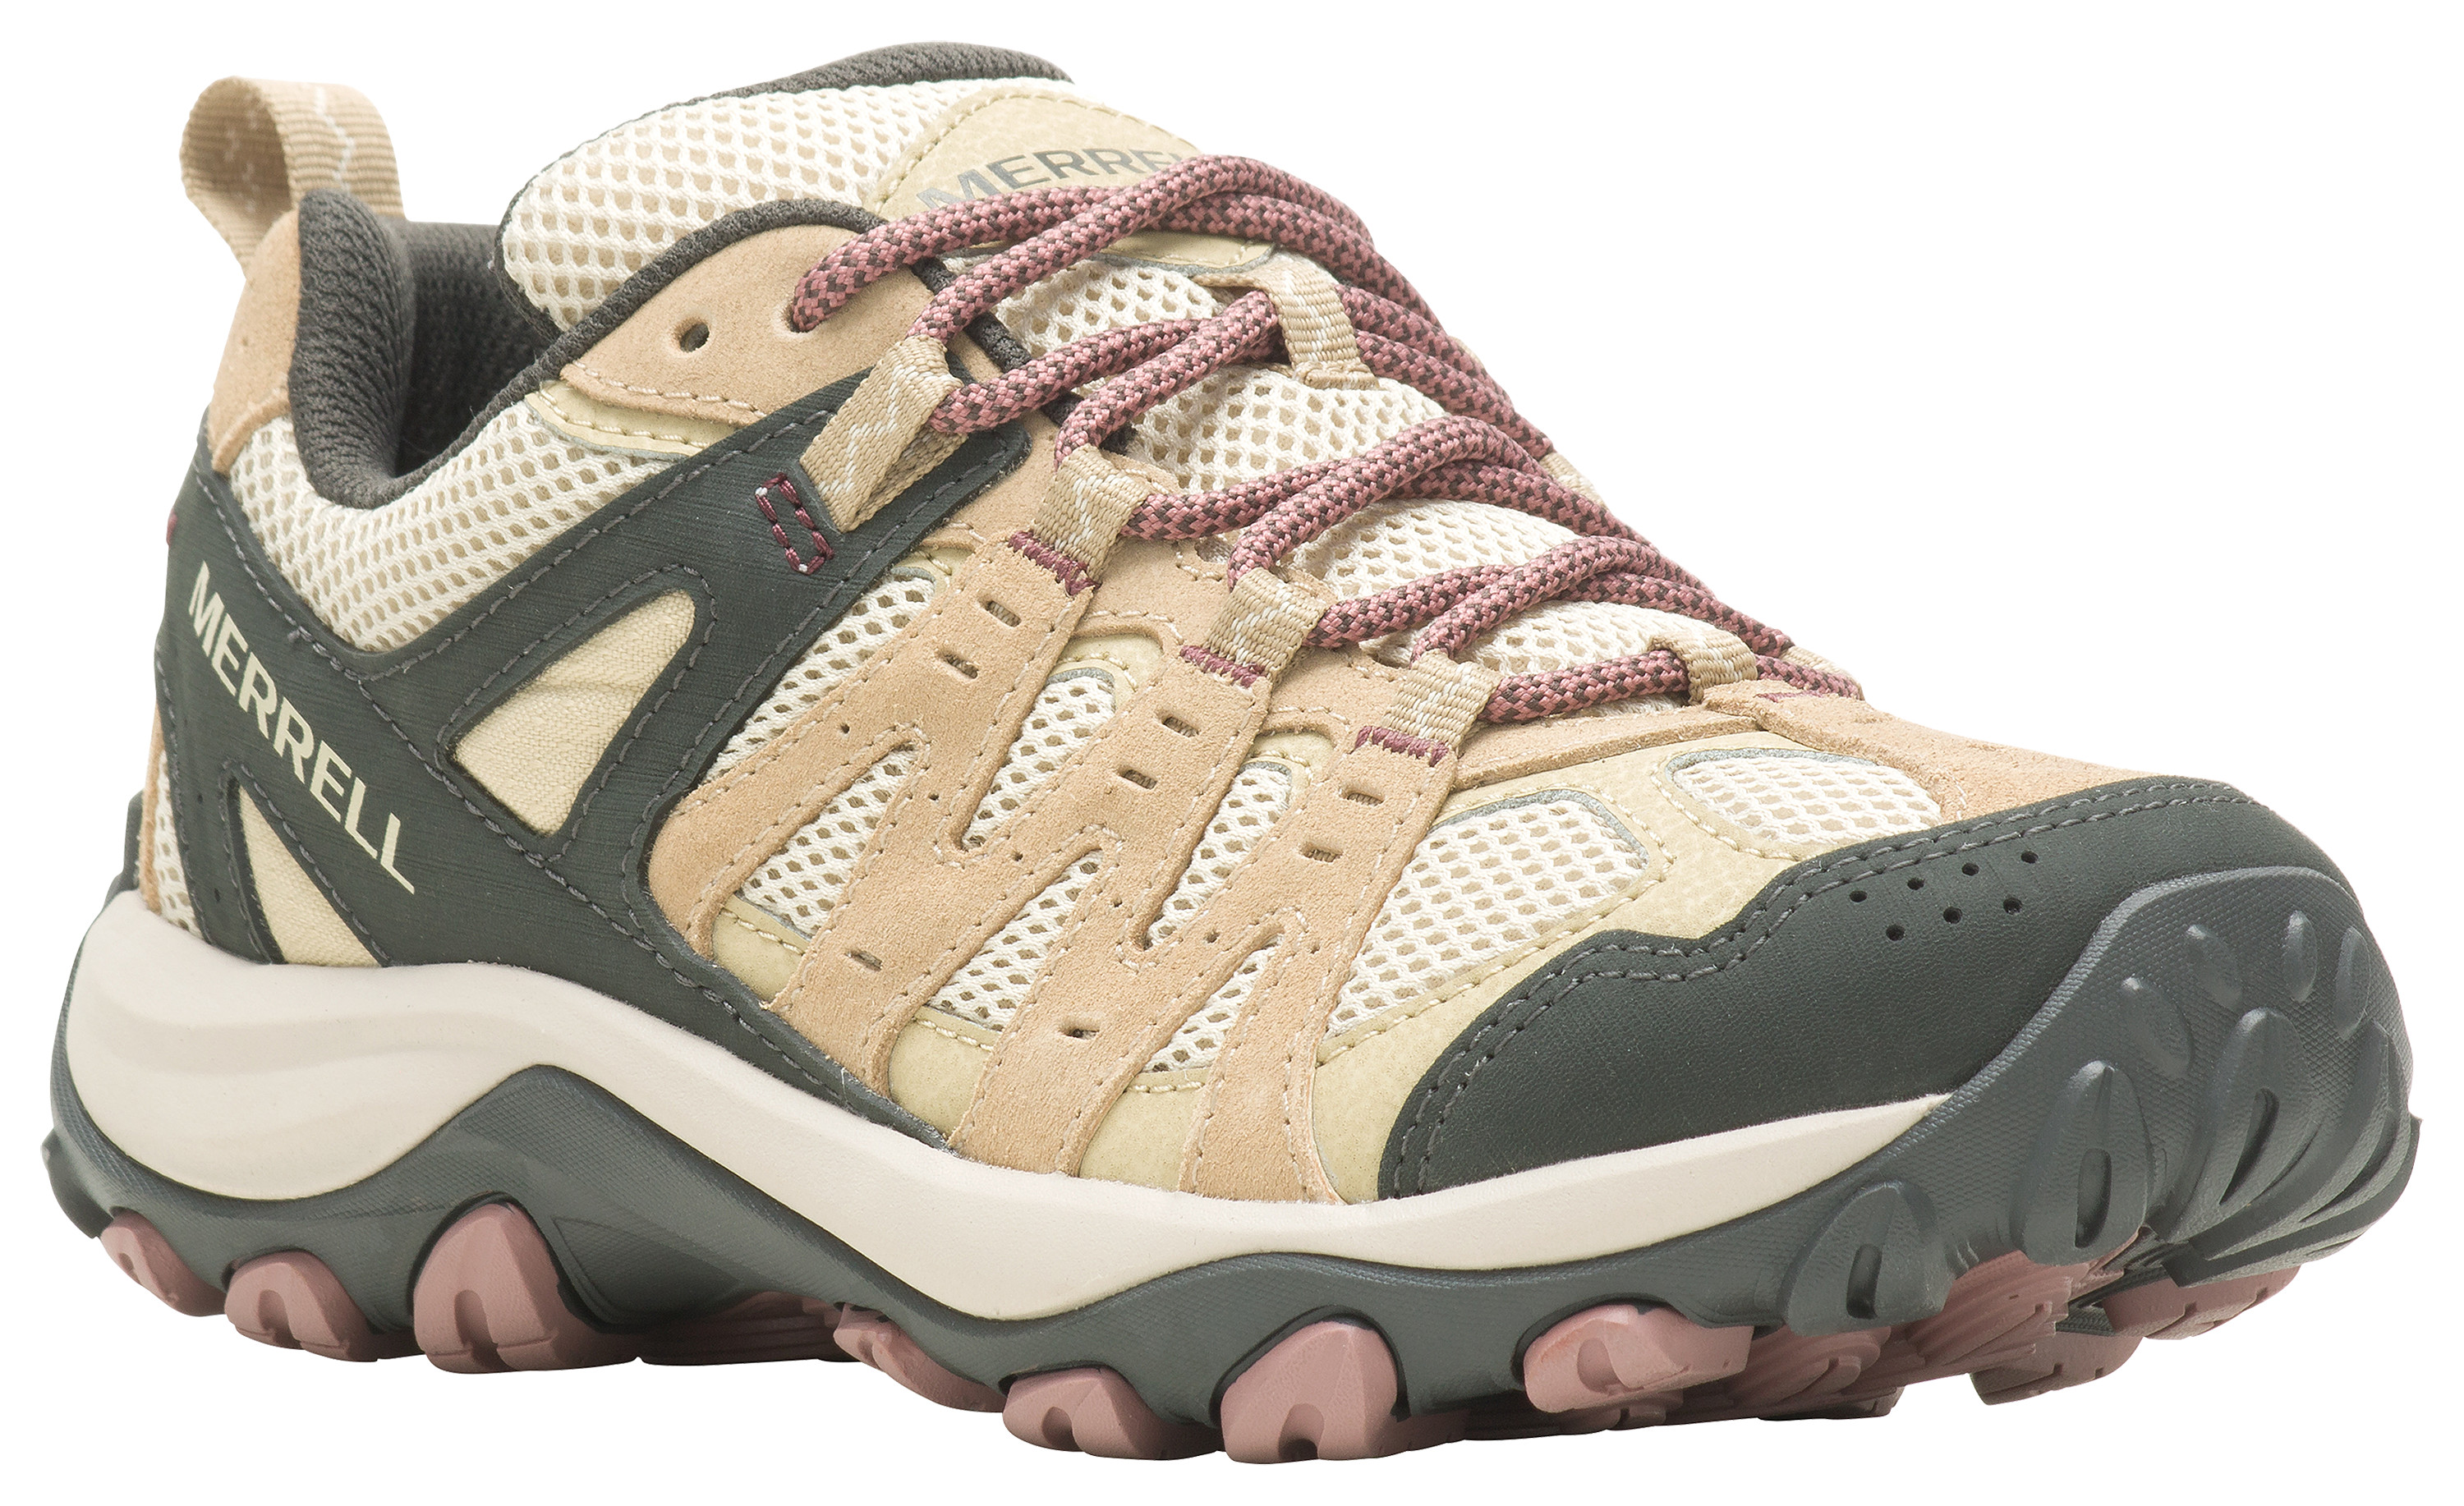 Accentor 3 Hiking for Ladies | Cabela's